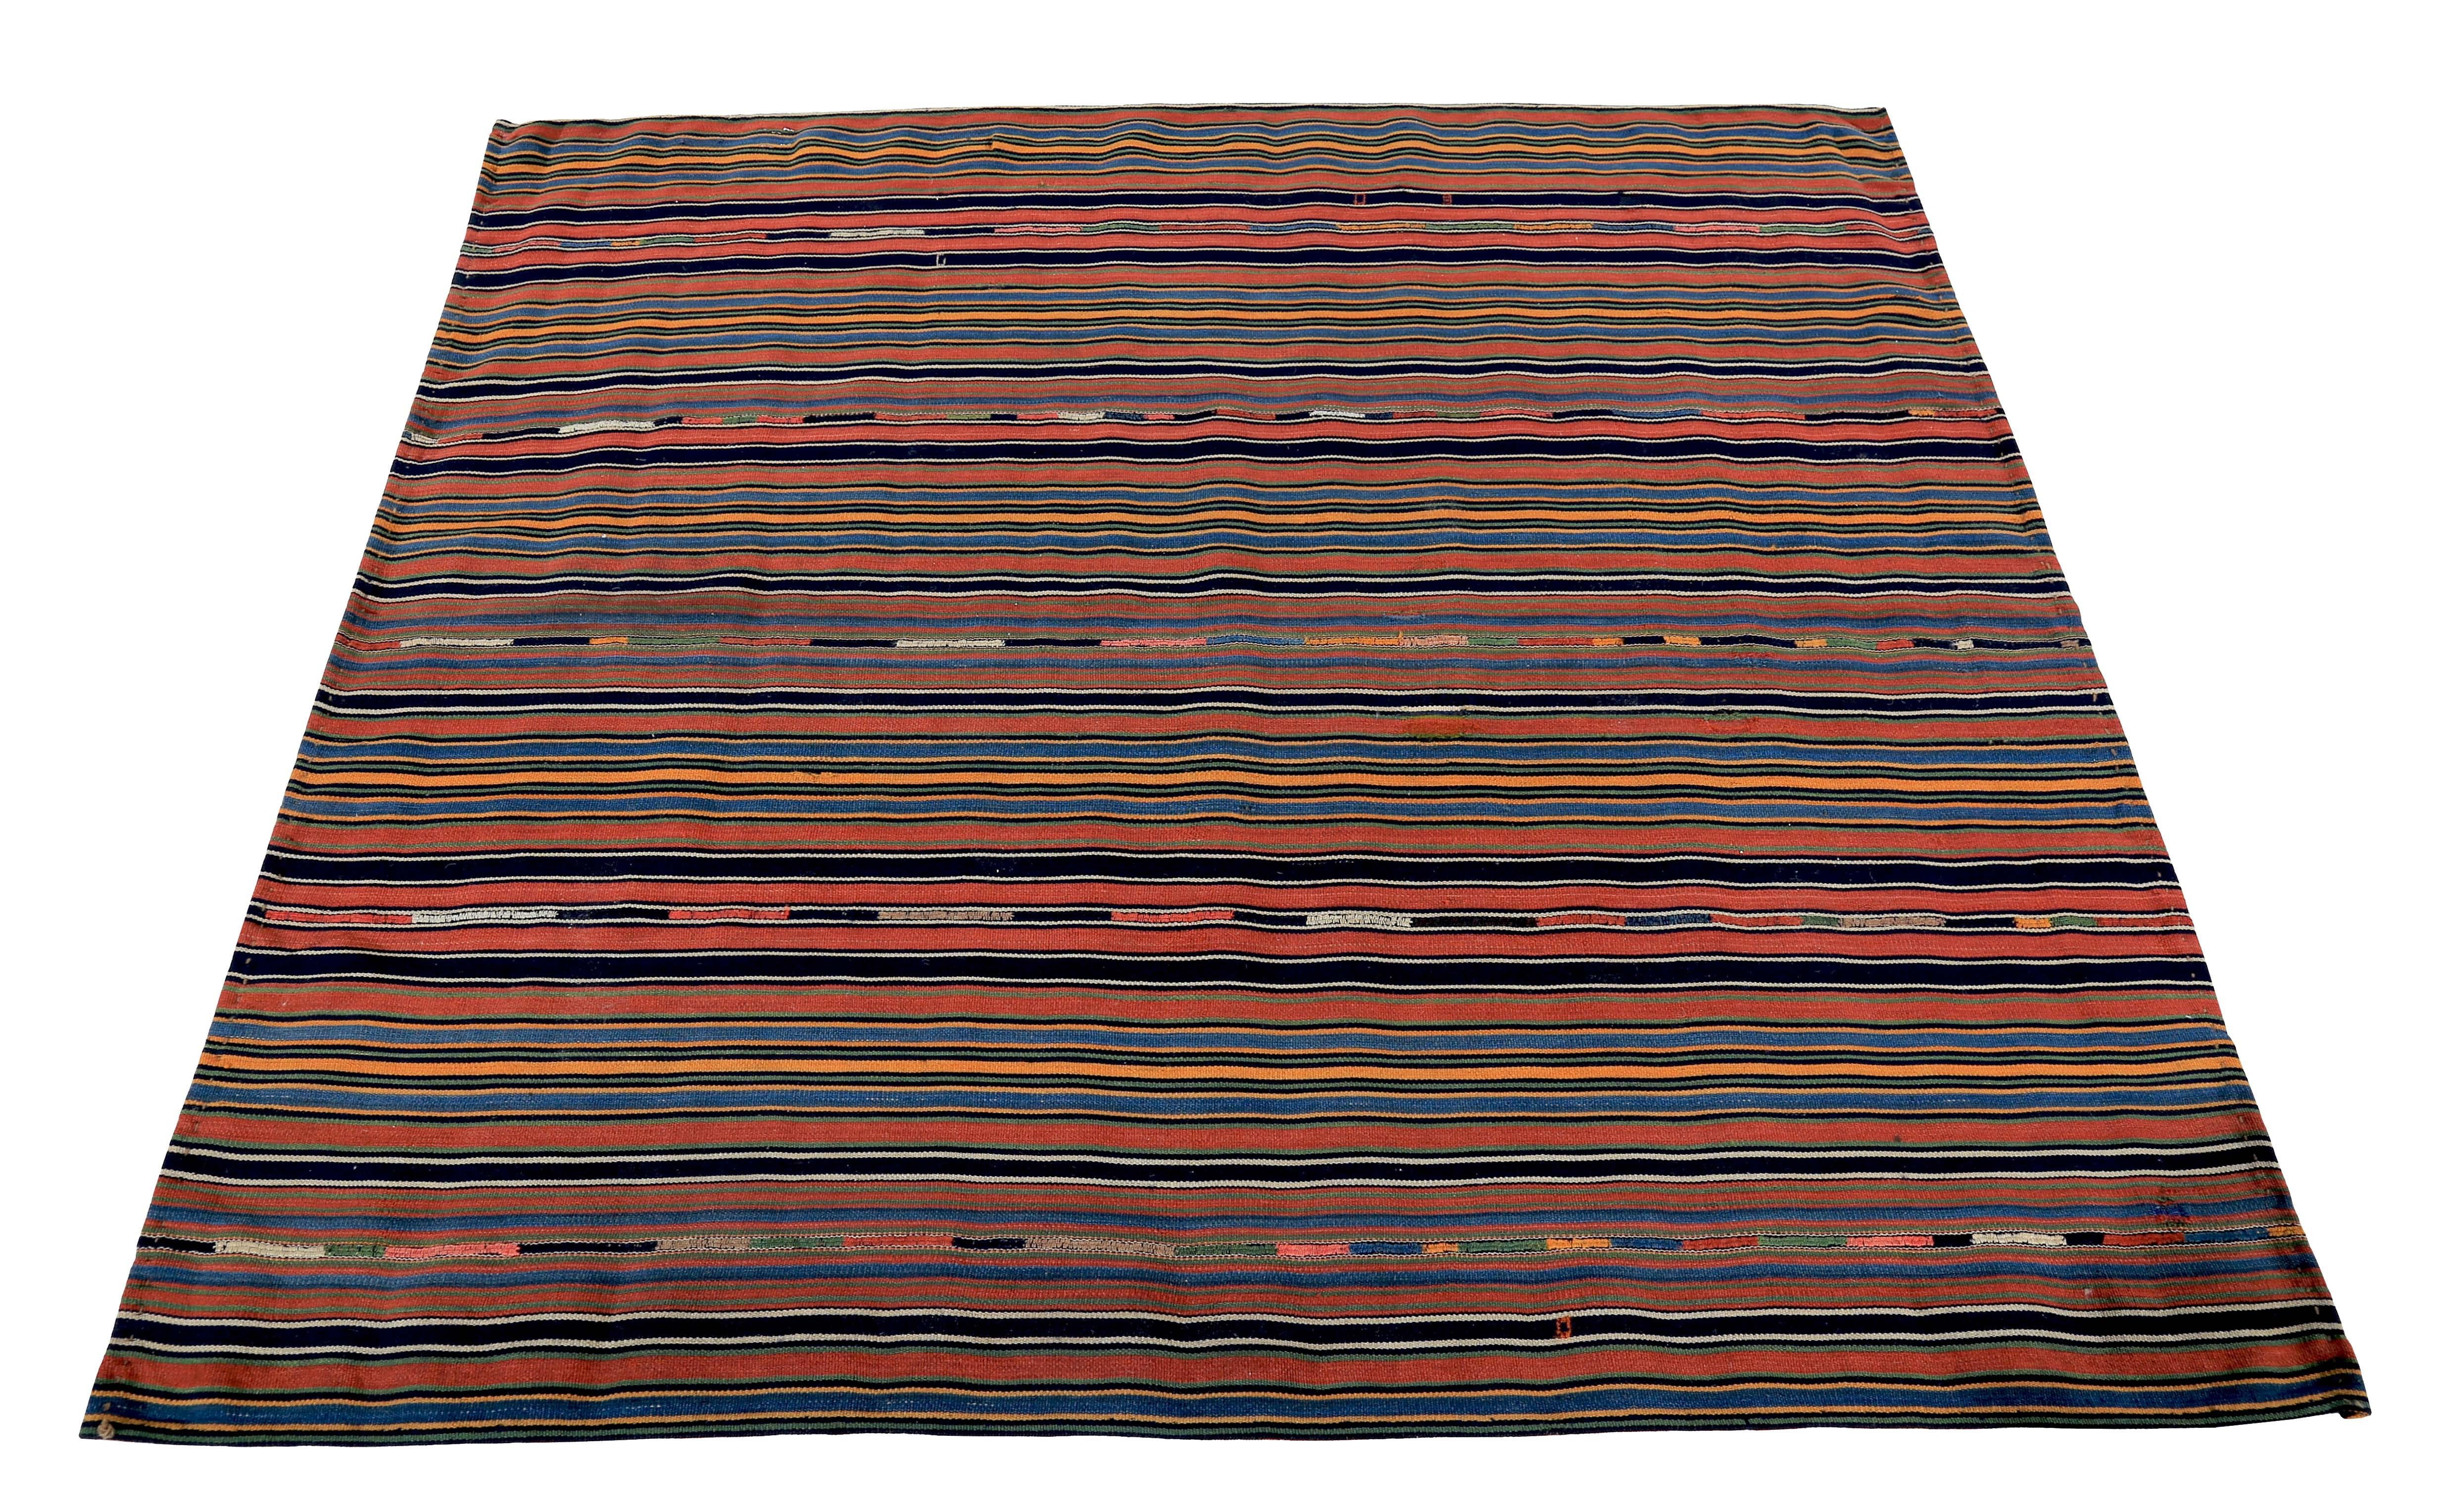 Modern Turkish rug handwoven from the finest sheep’s wool and colored with all-natural vegetable dyes that are safe for humans and pets. It’s a traditional Kilim flat-weave design featuring a red field with orange, black and blue pencil stripes.